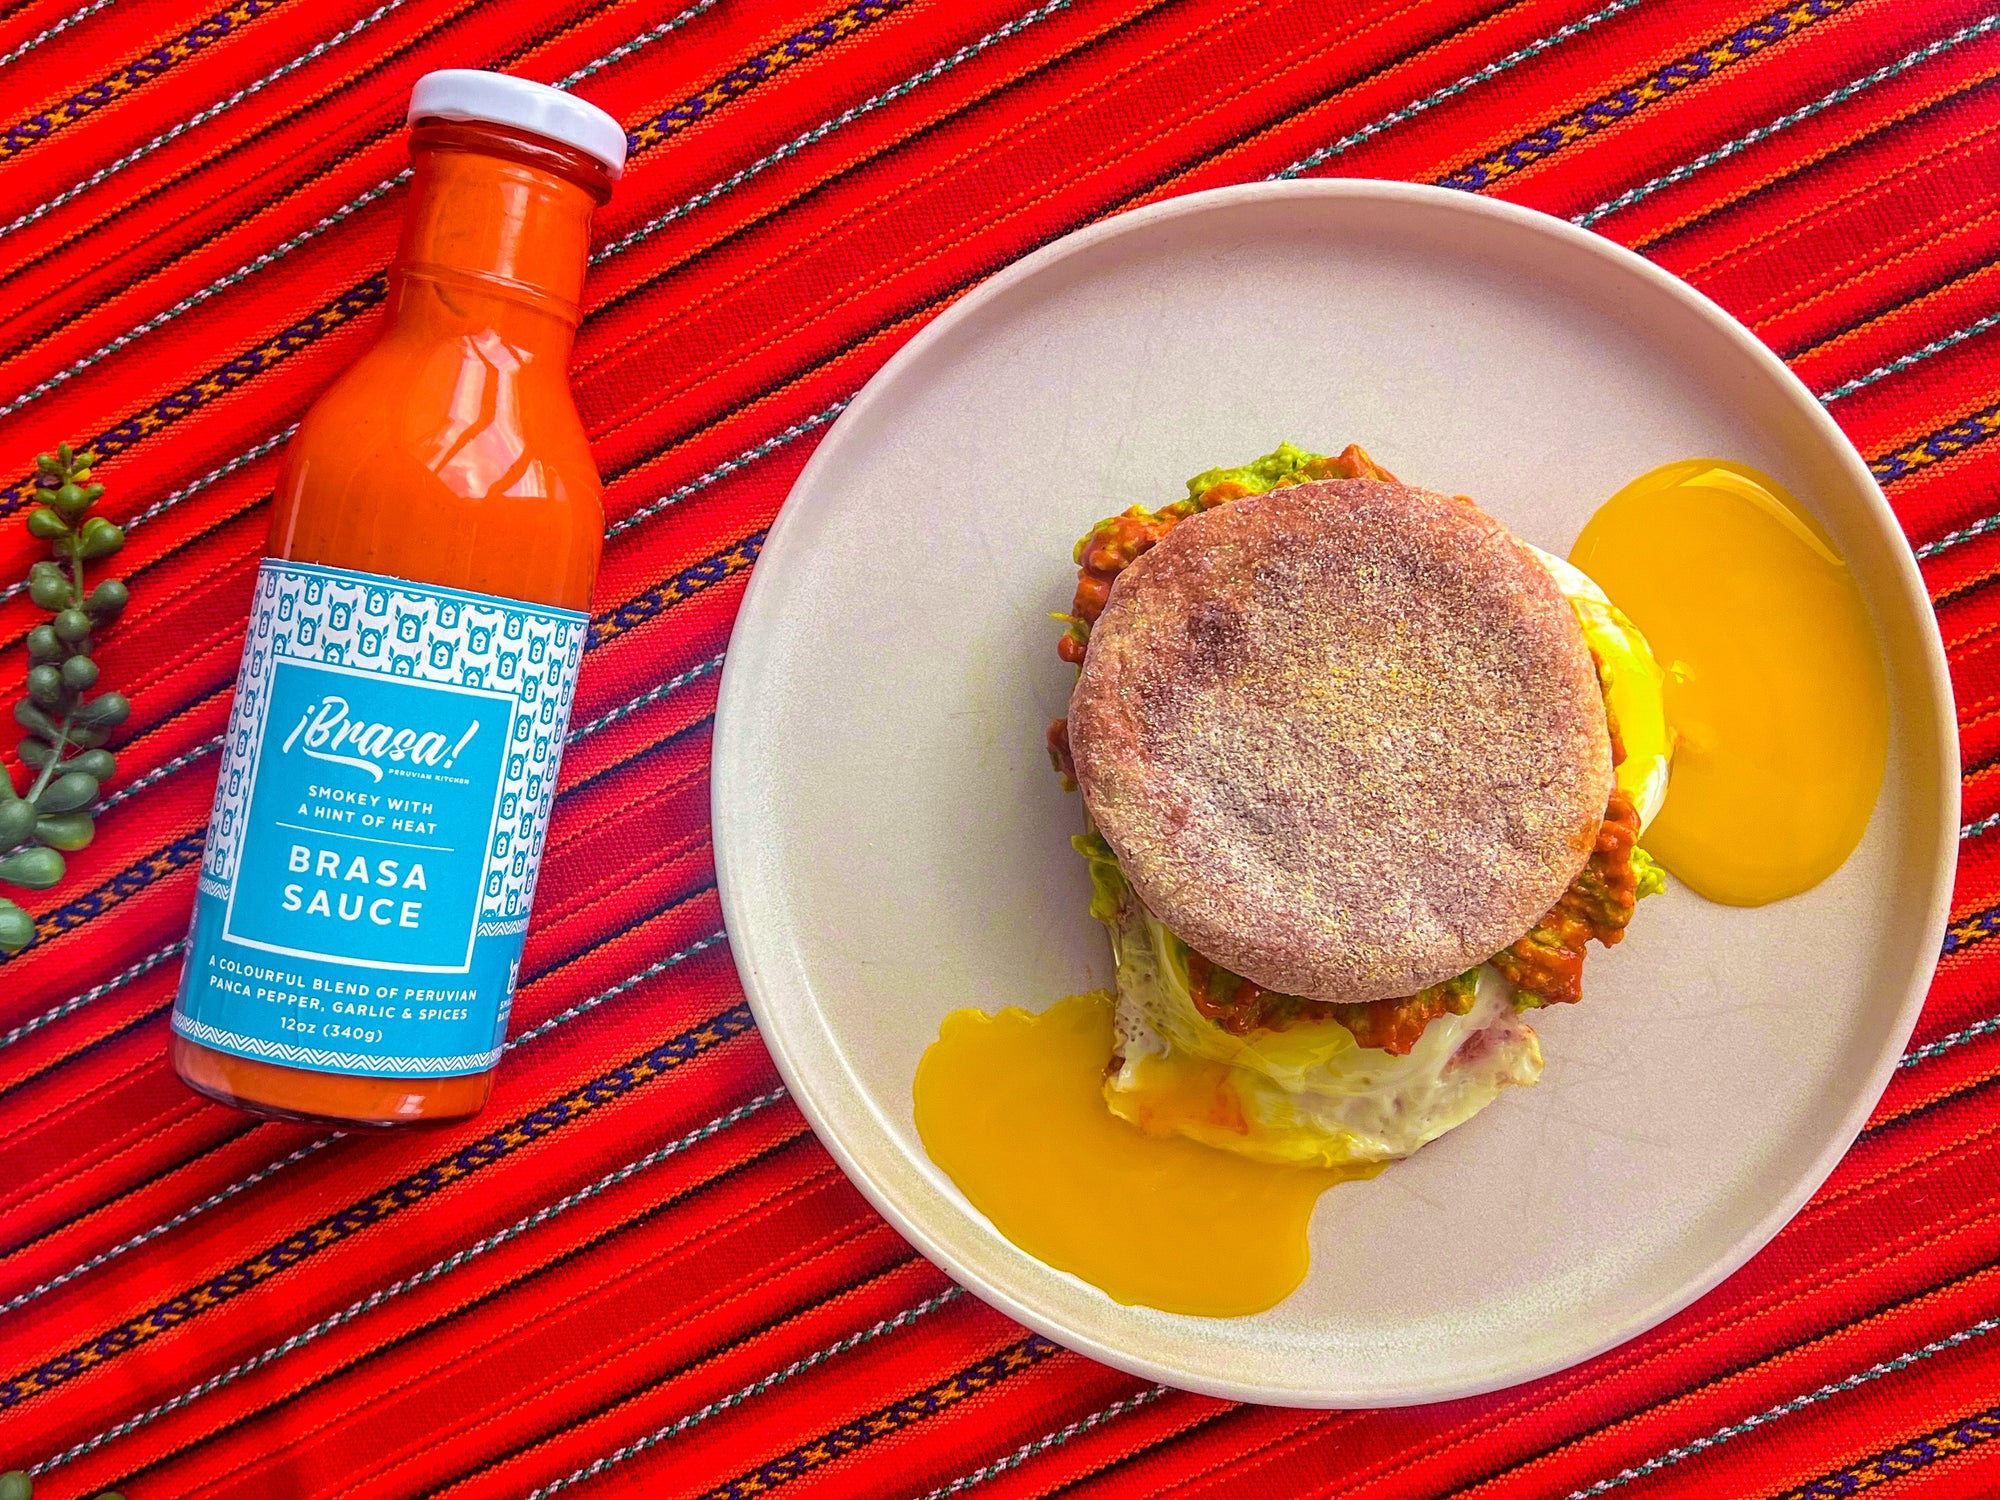 Recipe: Make the Perfect Breakfast Sandwich with our Brasa Sauce in Just 10 minutes!